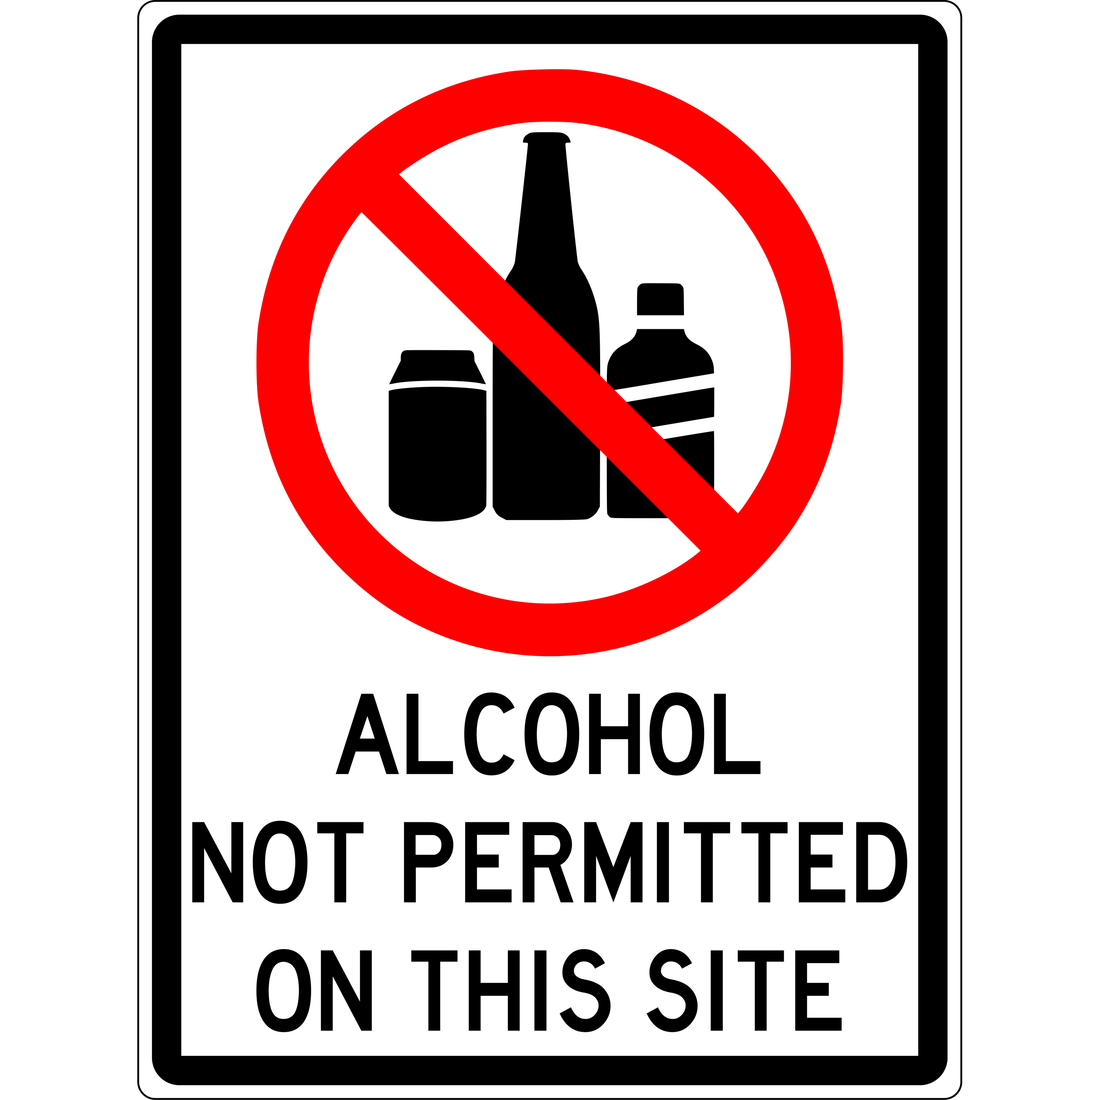 PROHIBITION - ALCOHOL NOT PERMITTED ON THIS SITE